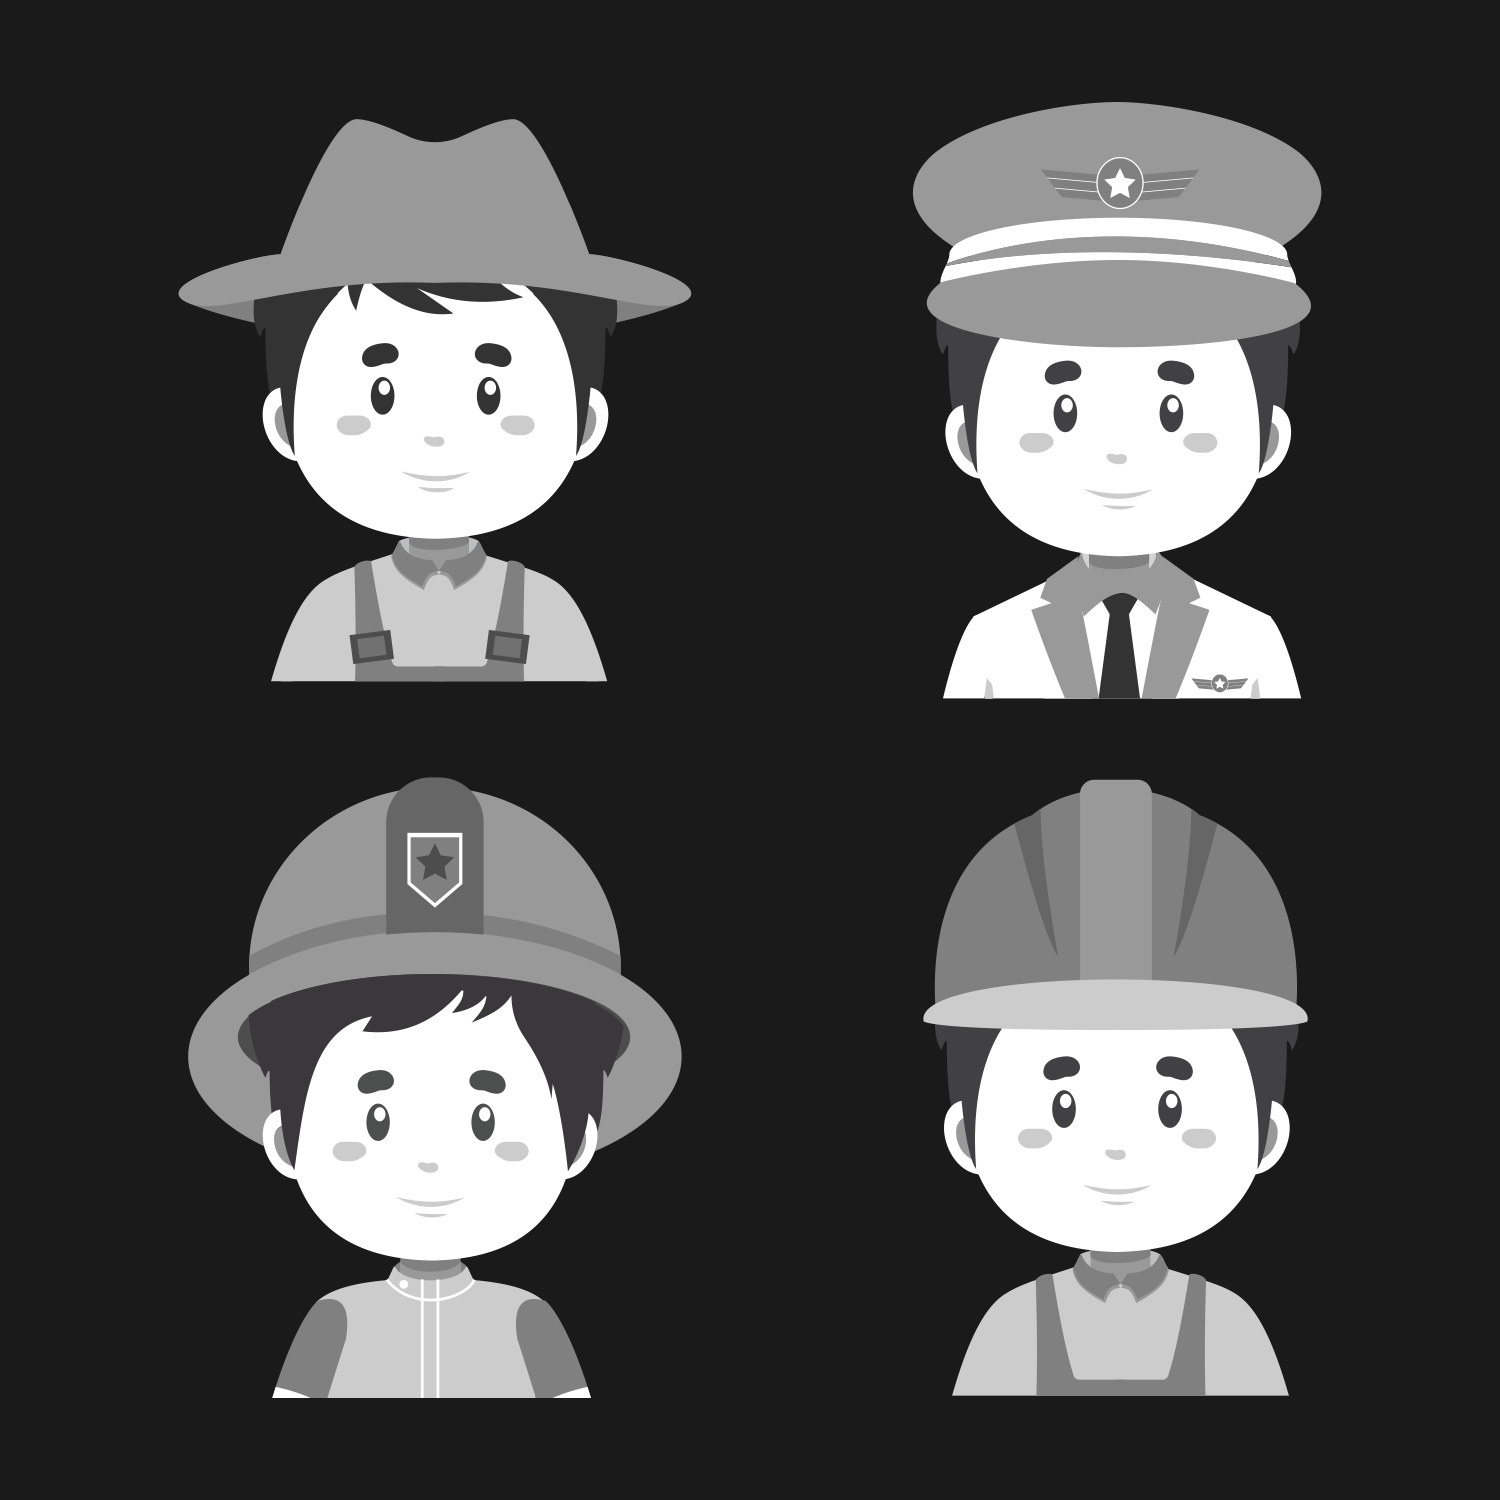 Free vector Great Variety male Workers with No Expression Avatars design CDR file download free